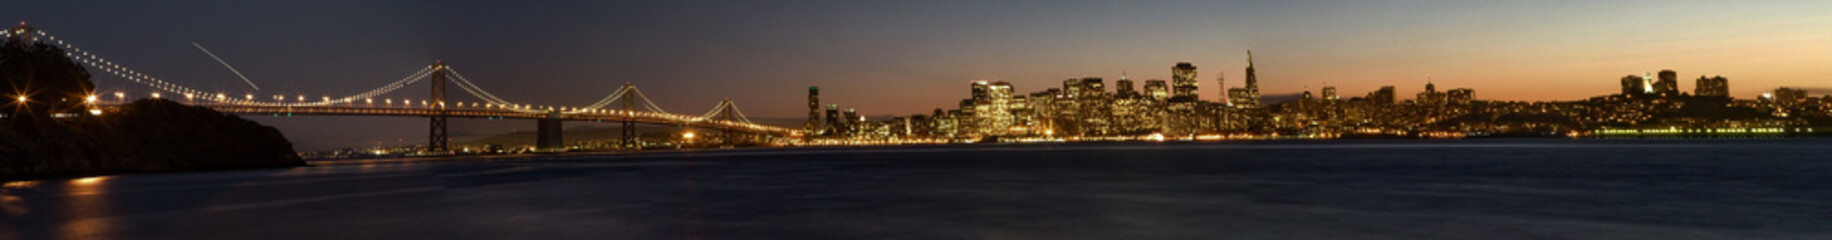 the skyline of San Francisco with the bay bridge at night